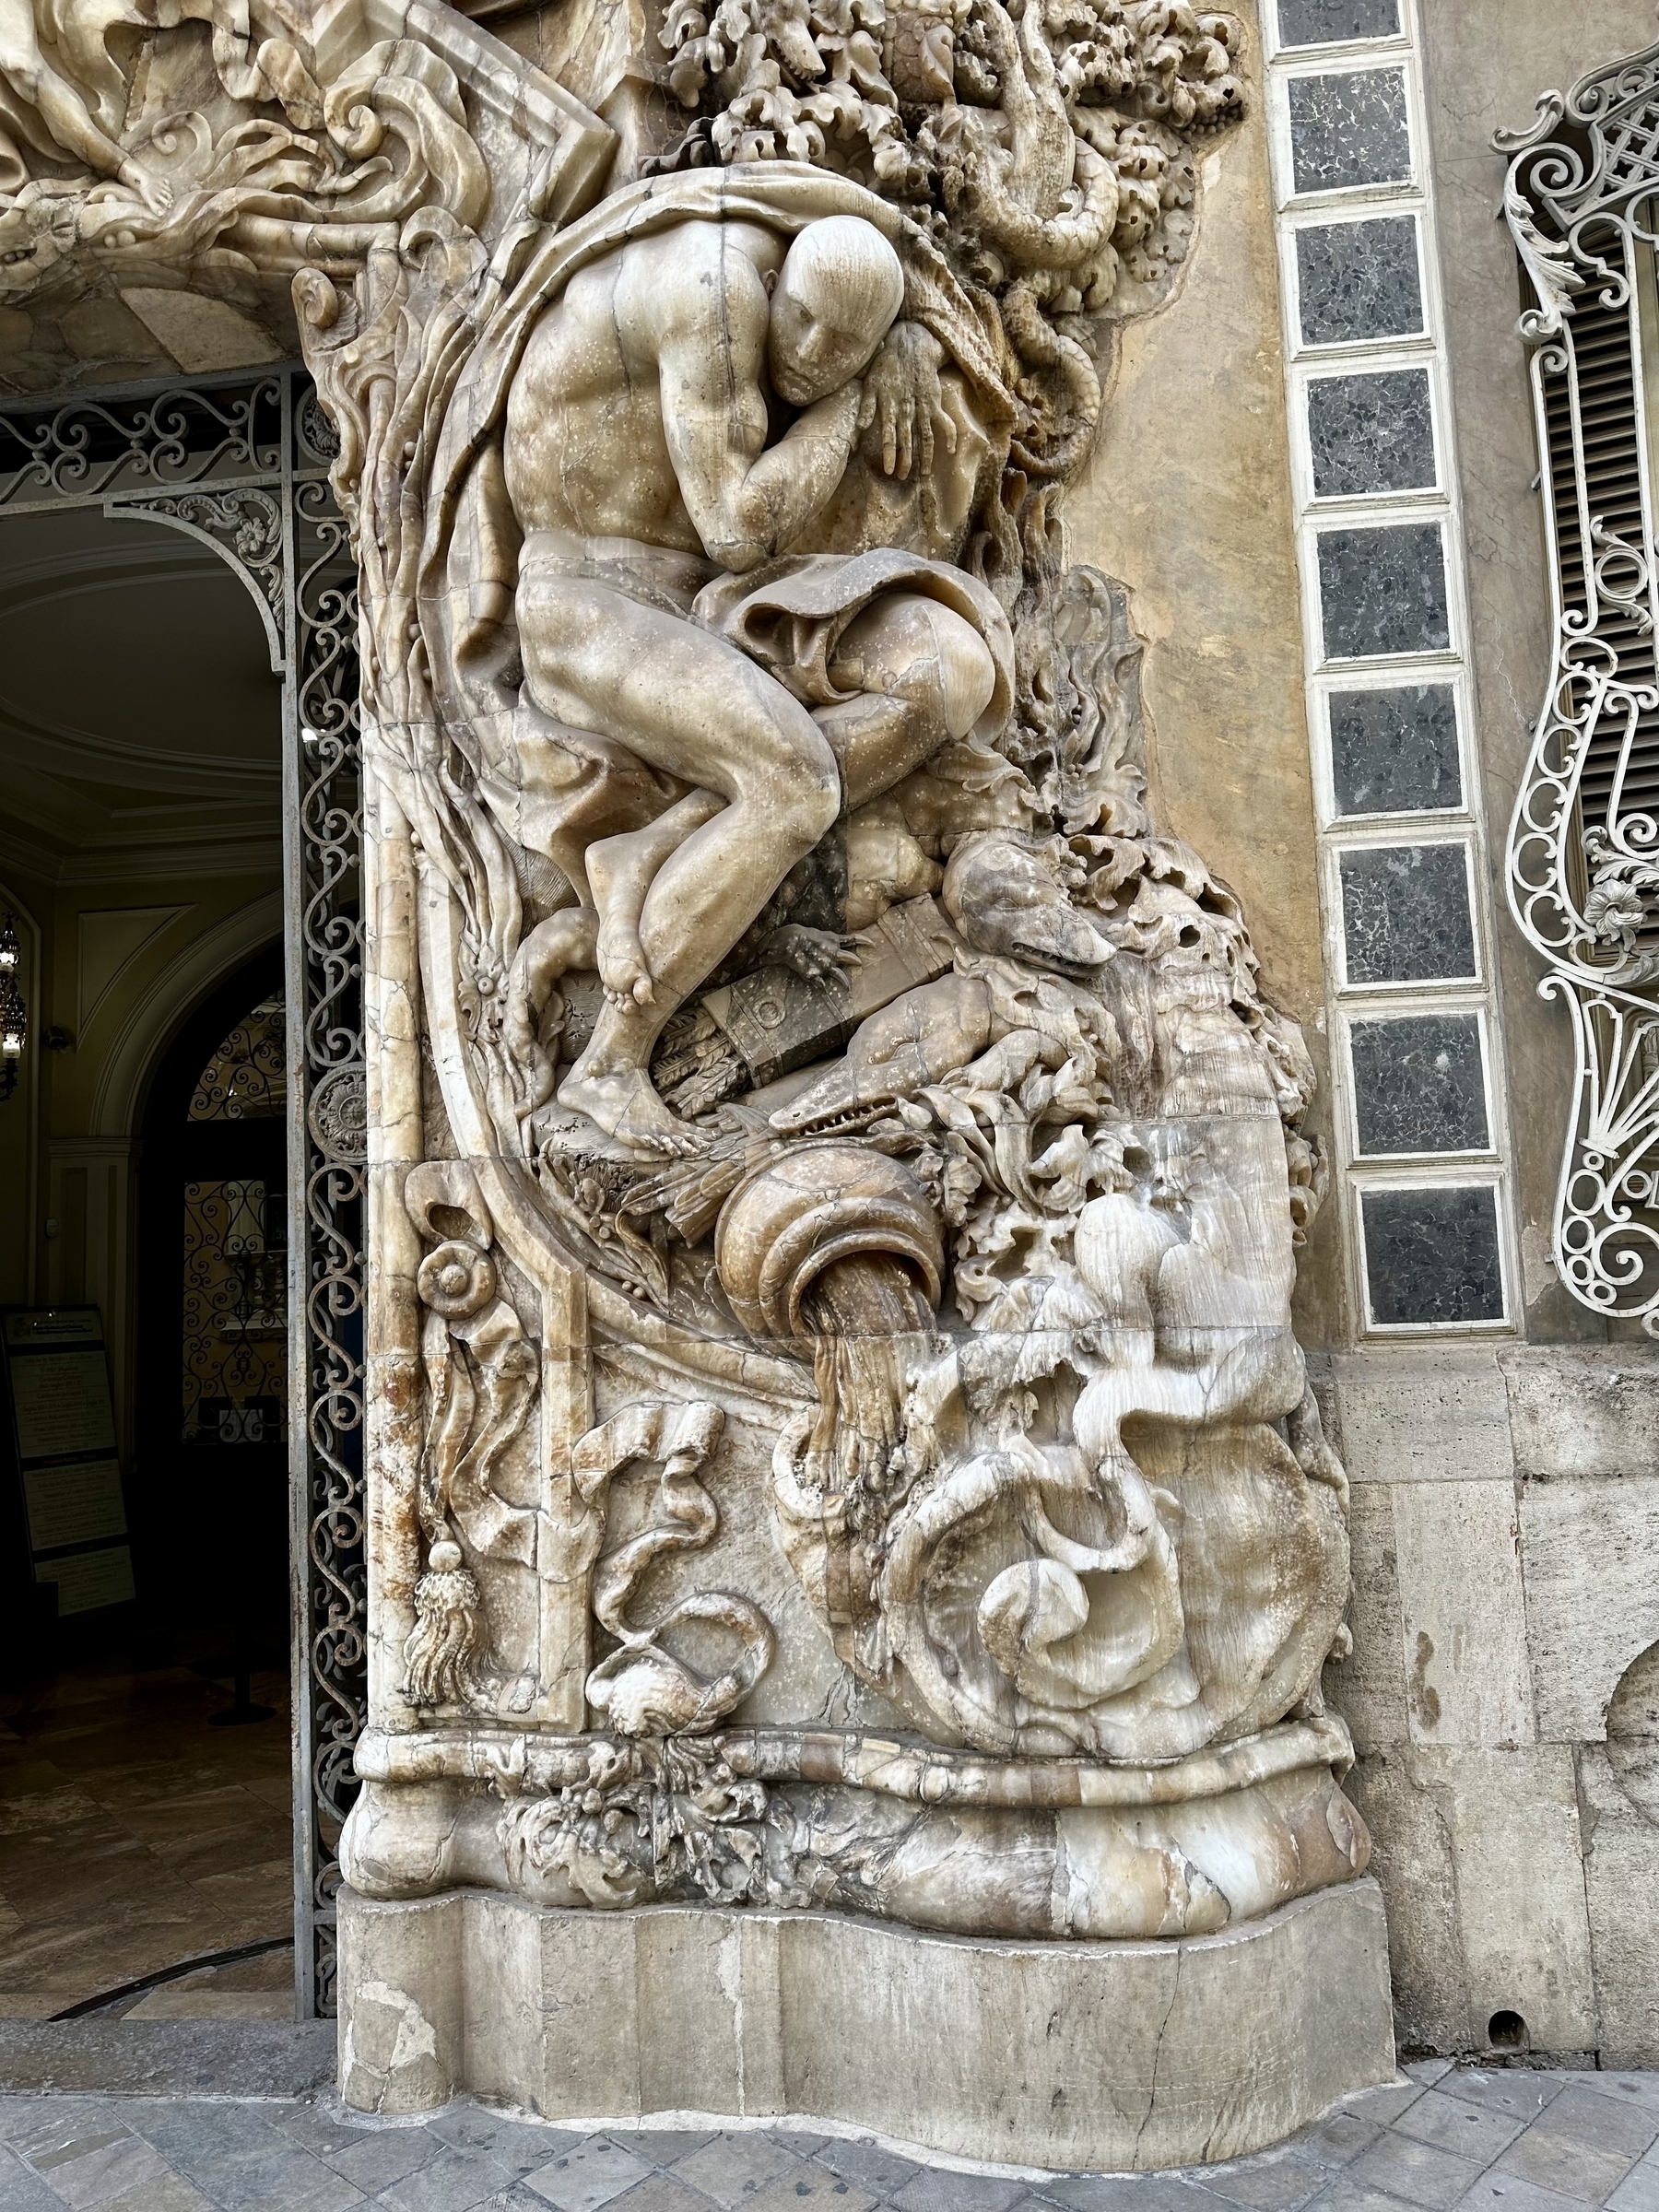 Building facade with a marble relief of a hunched man standing above a jug of water and an alligator.